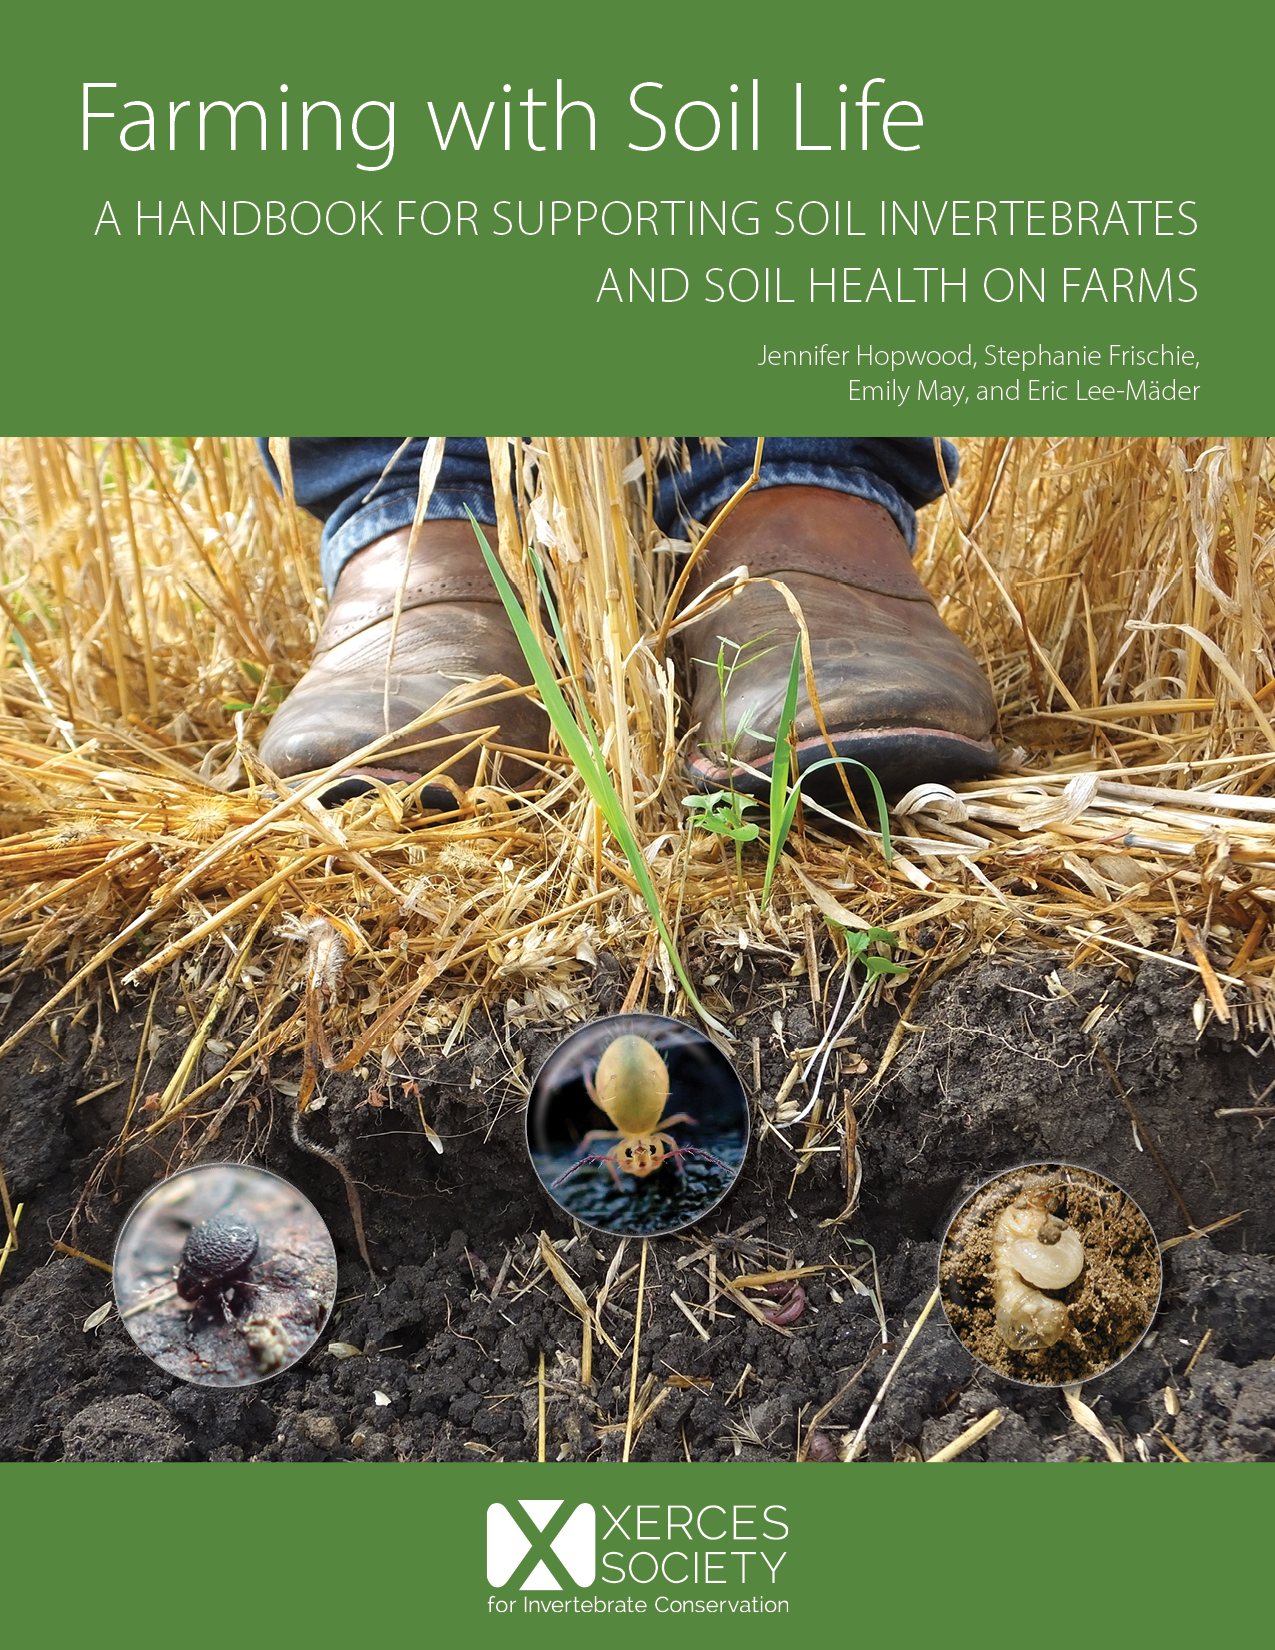 The front cover of a report with white text on a green background and a large photo showing the boots of someone standing above a hole dug to show the soil